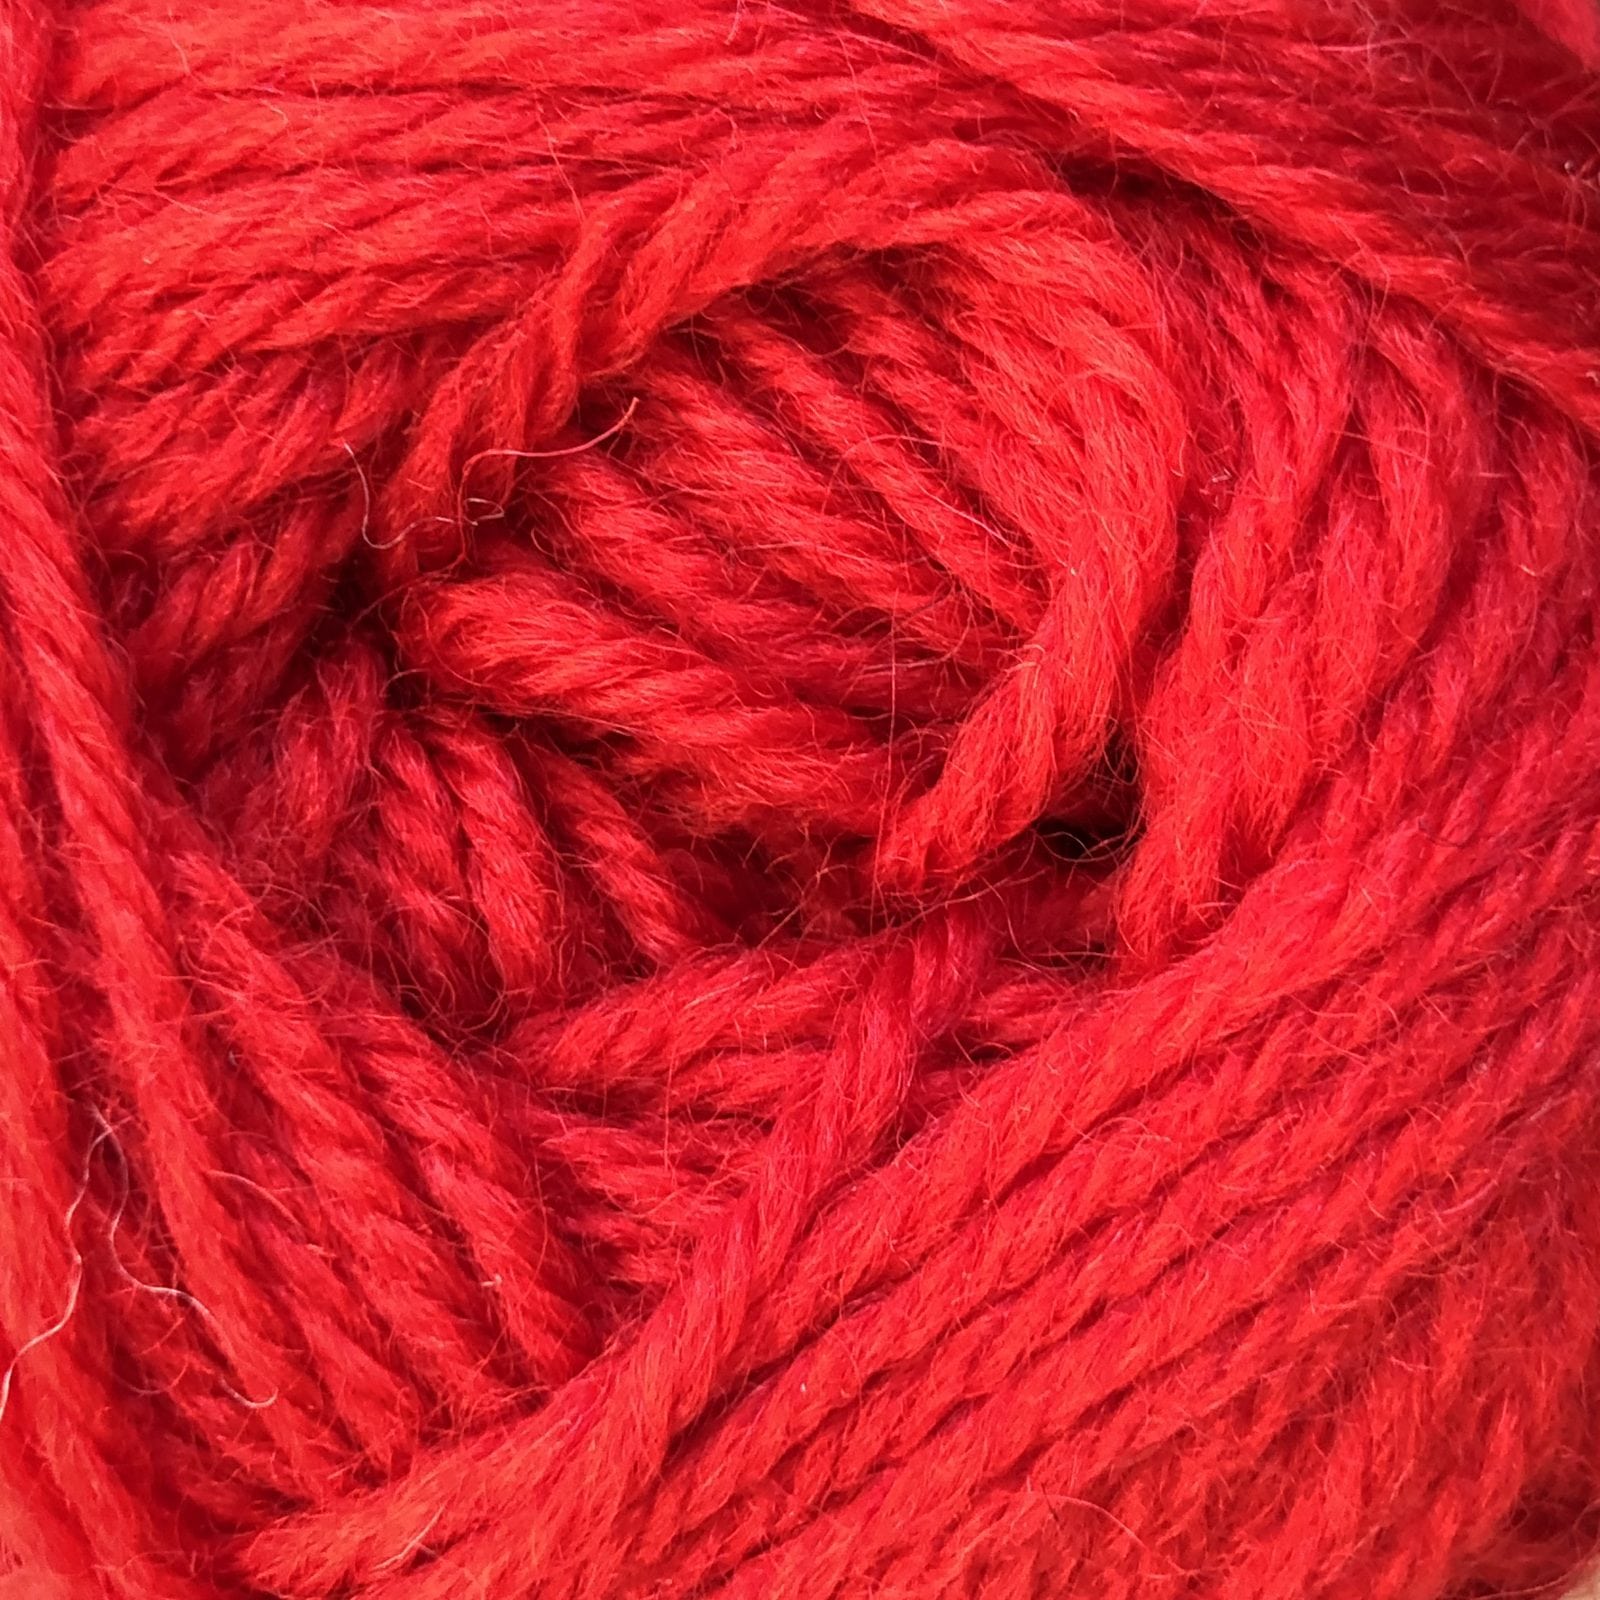 Countrywide Windsor 100% New Zealand wool yarn 8ply 8 ply double knit dk Red shade 24